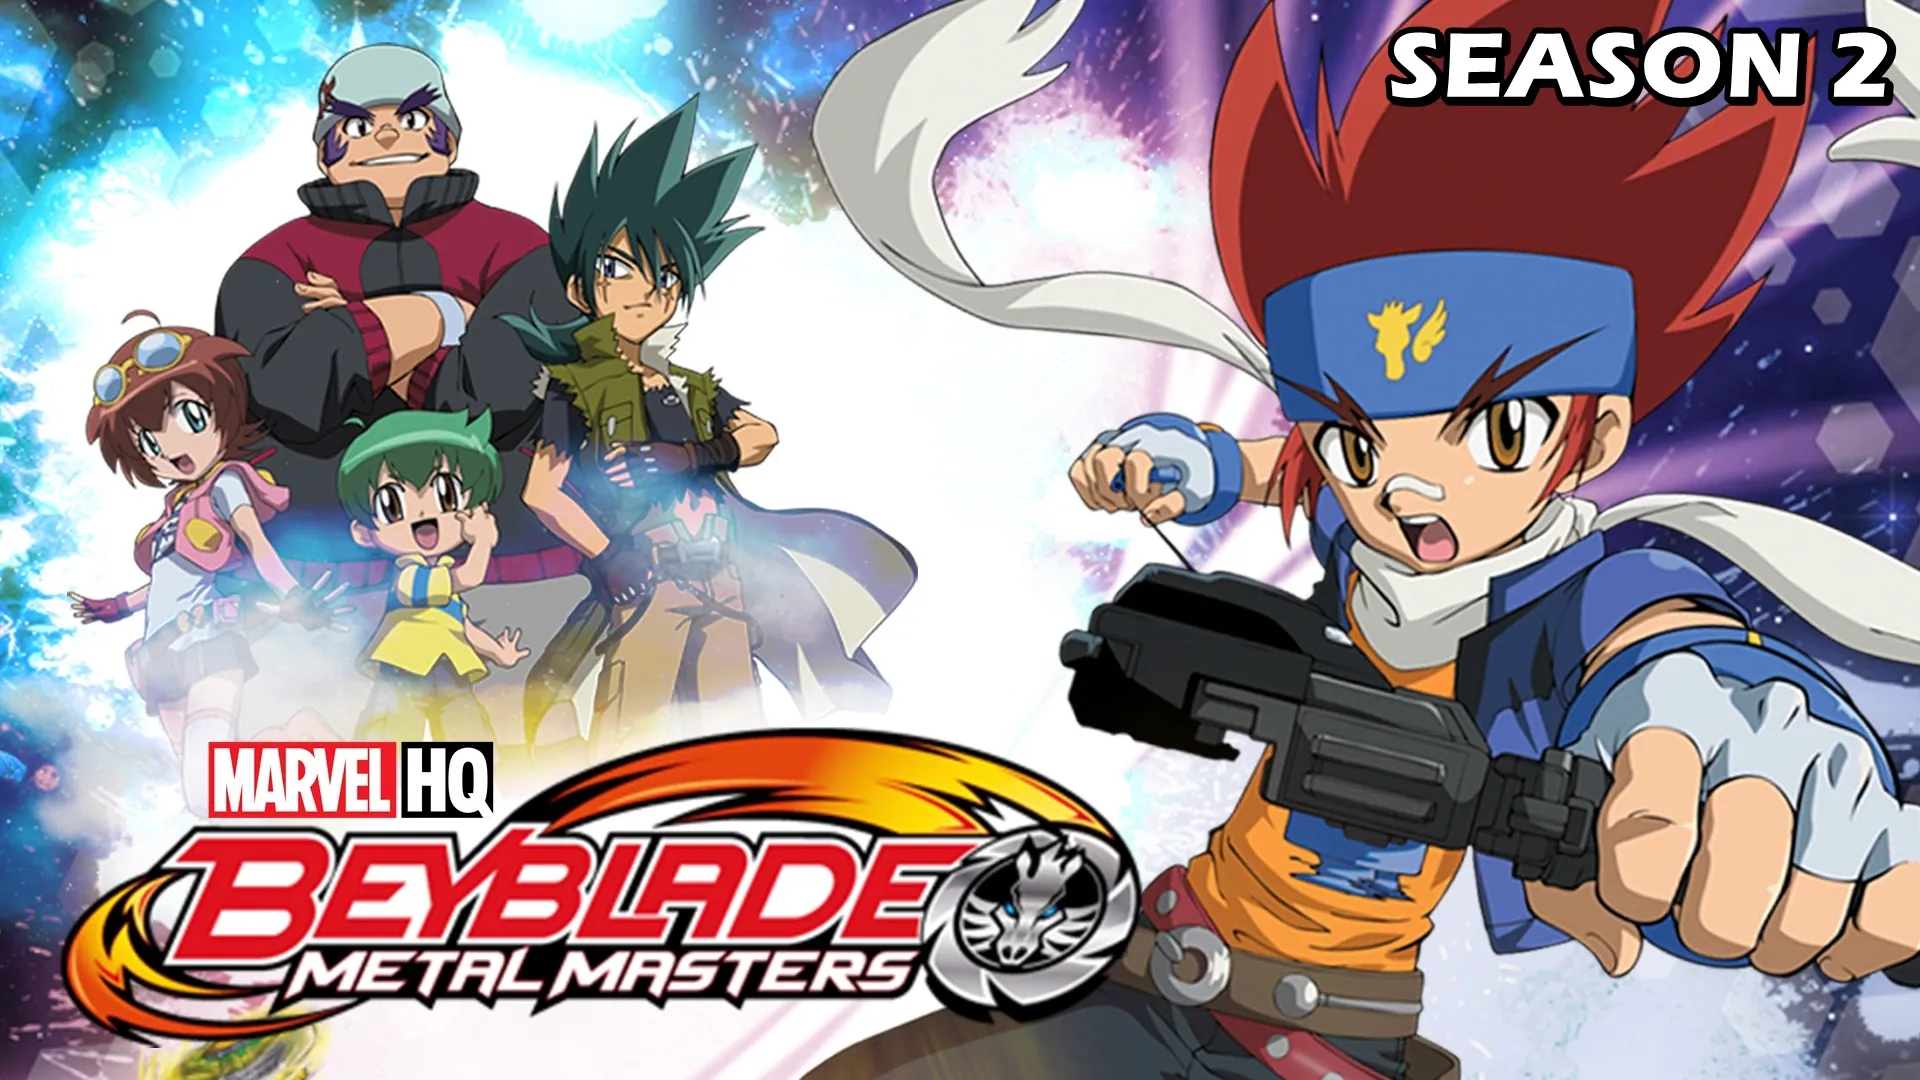 Beyblade Metal Masters Season 2 Hindi Dubbed Episodes Download FHD Rare Toons India